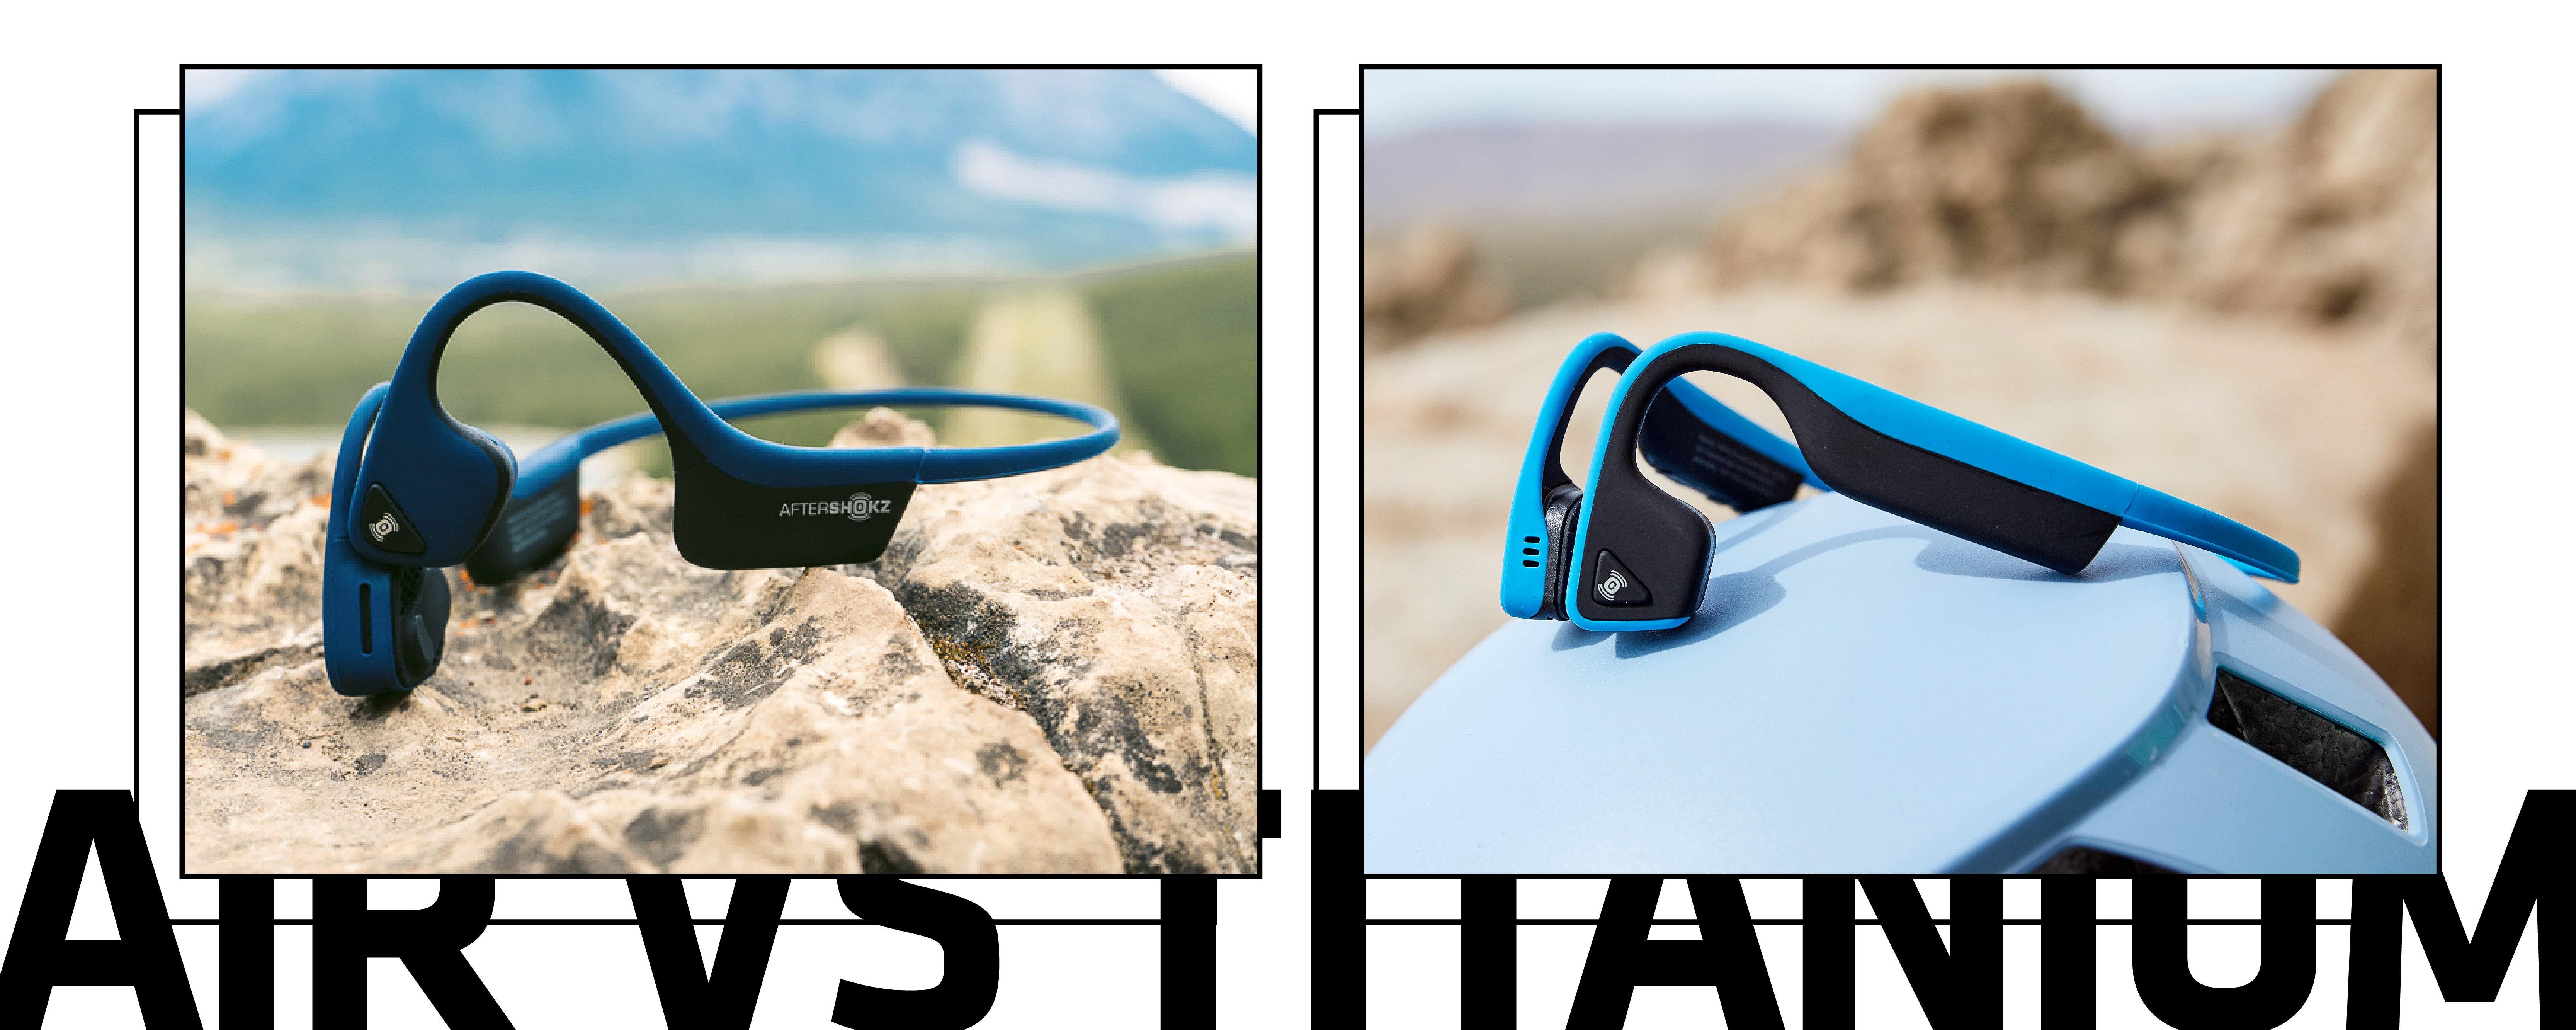 Air vs Titanium: Find The Best AfterShokz Headphone For You